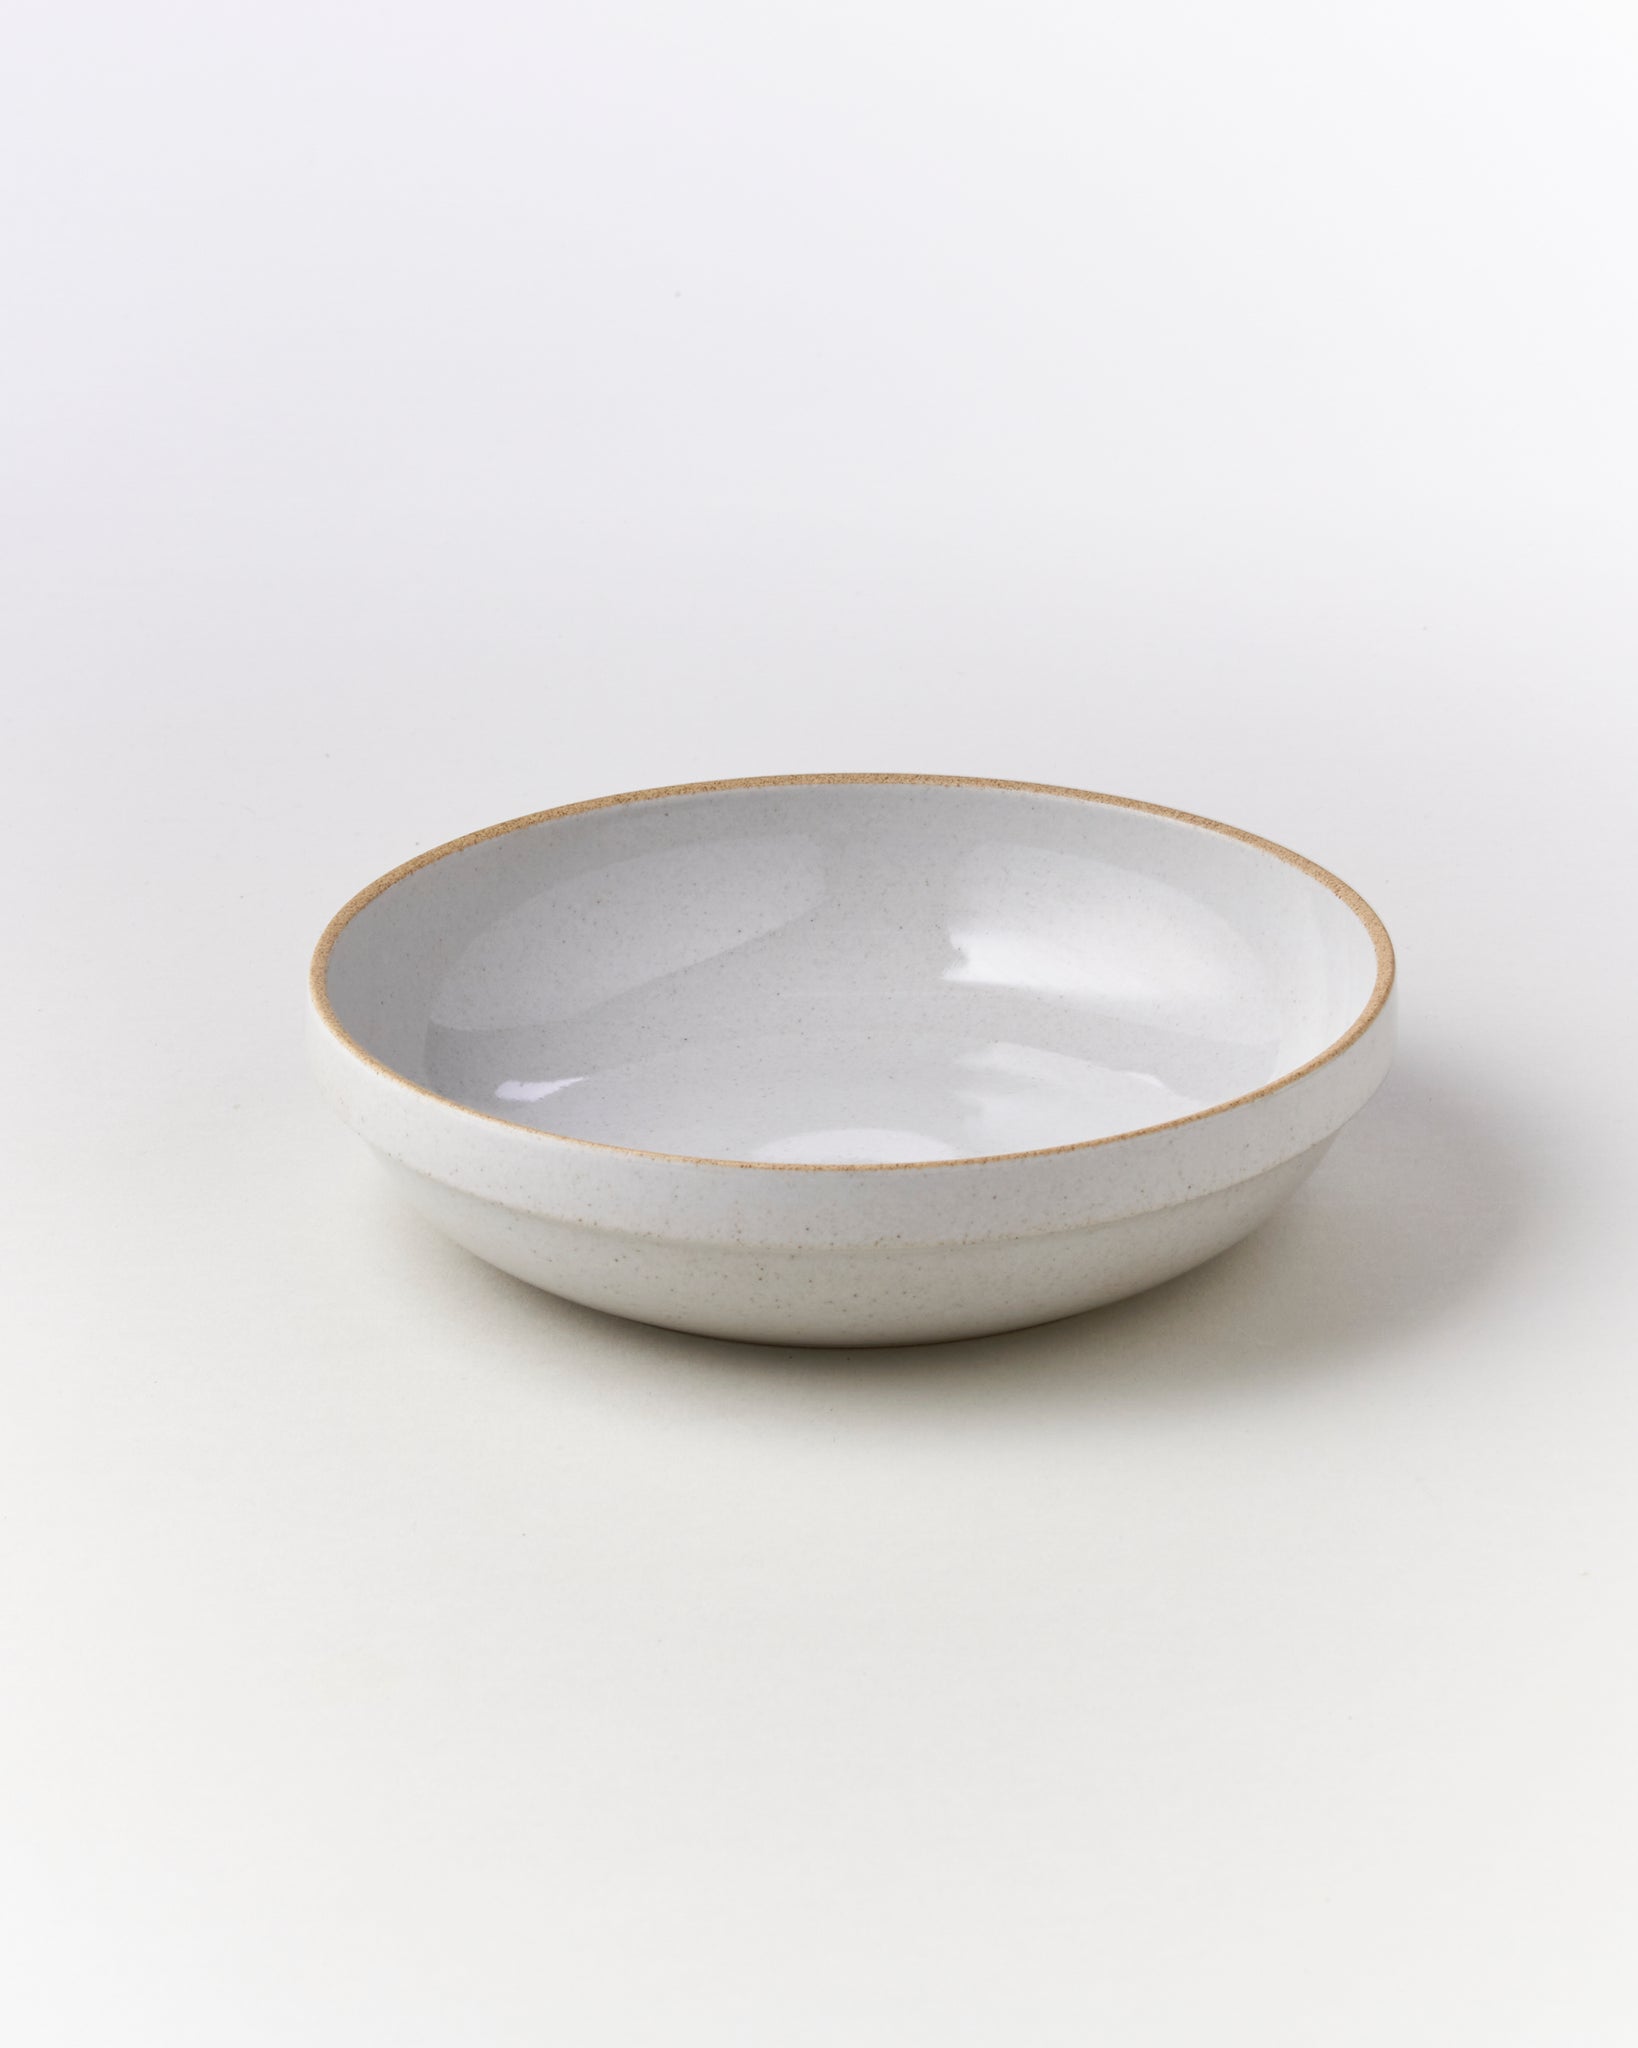 Hasami 8 5/8-inch Round Bowl in Gloss Grey